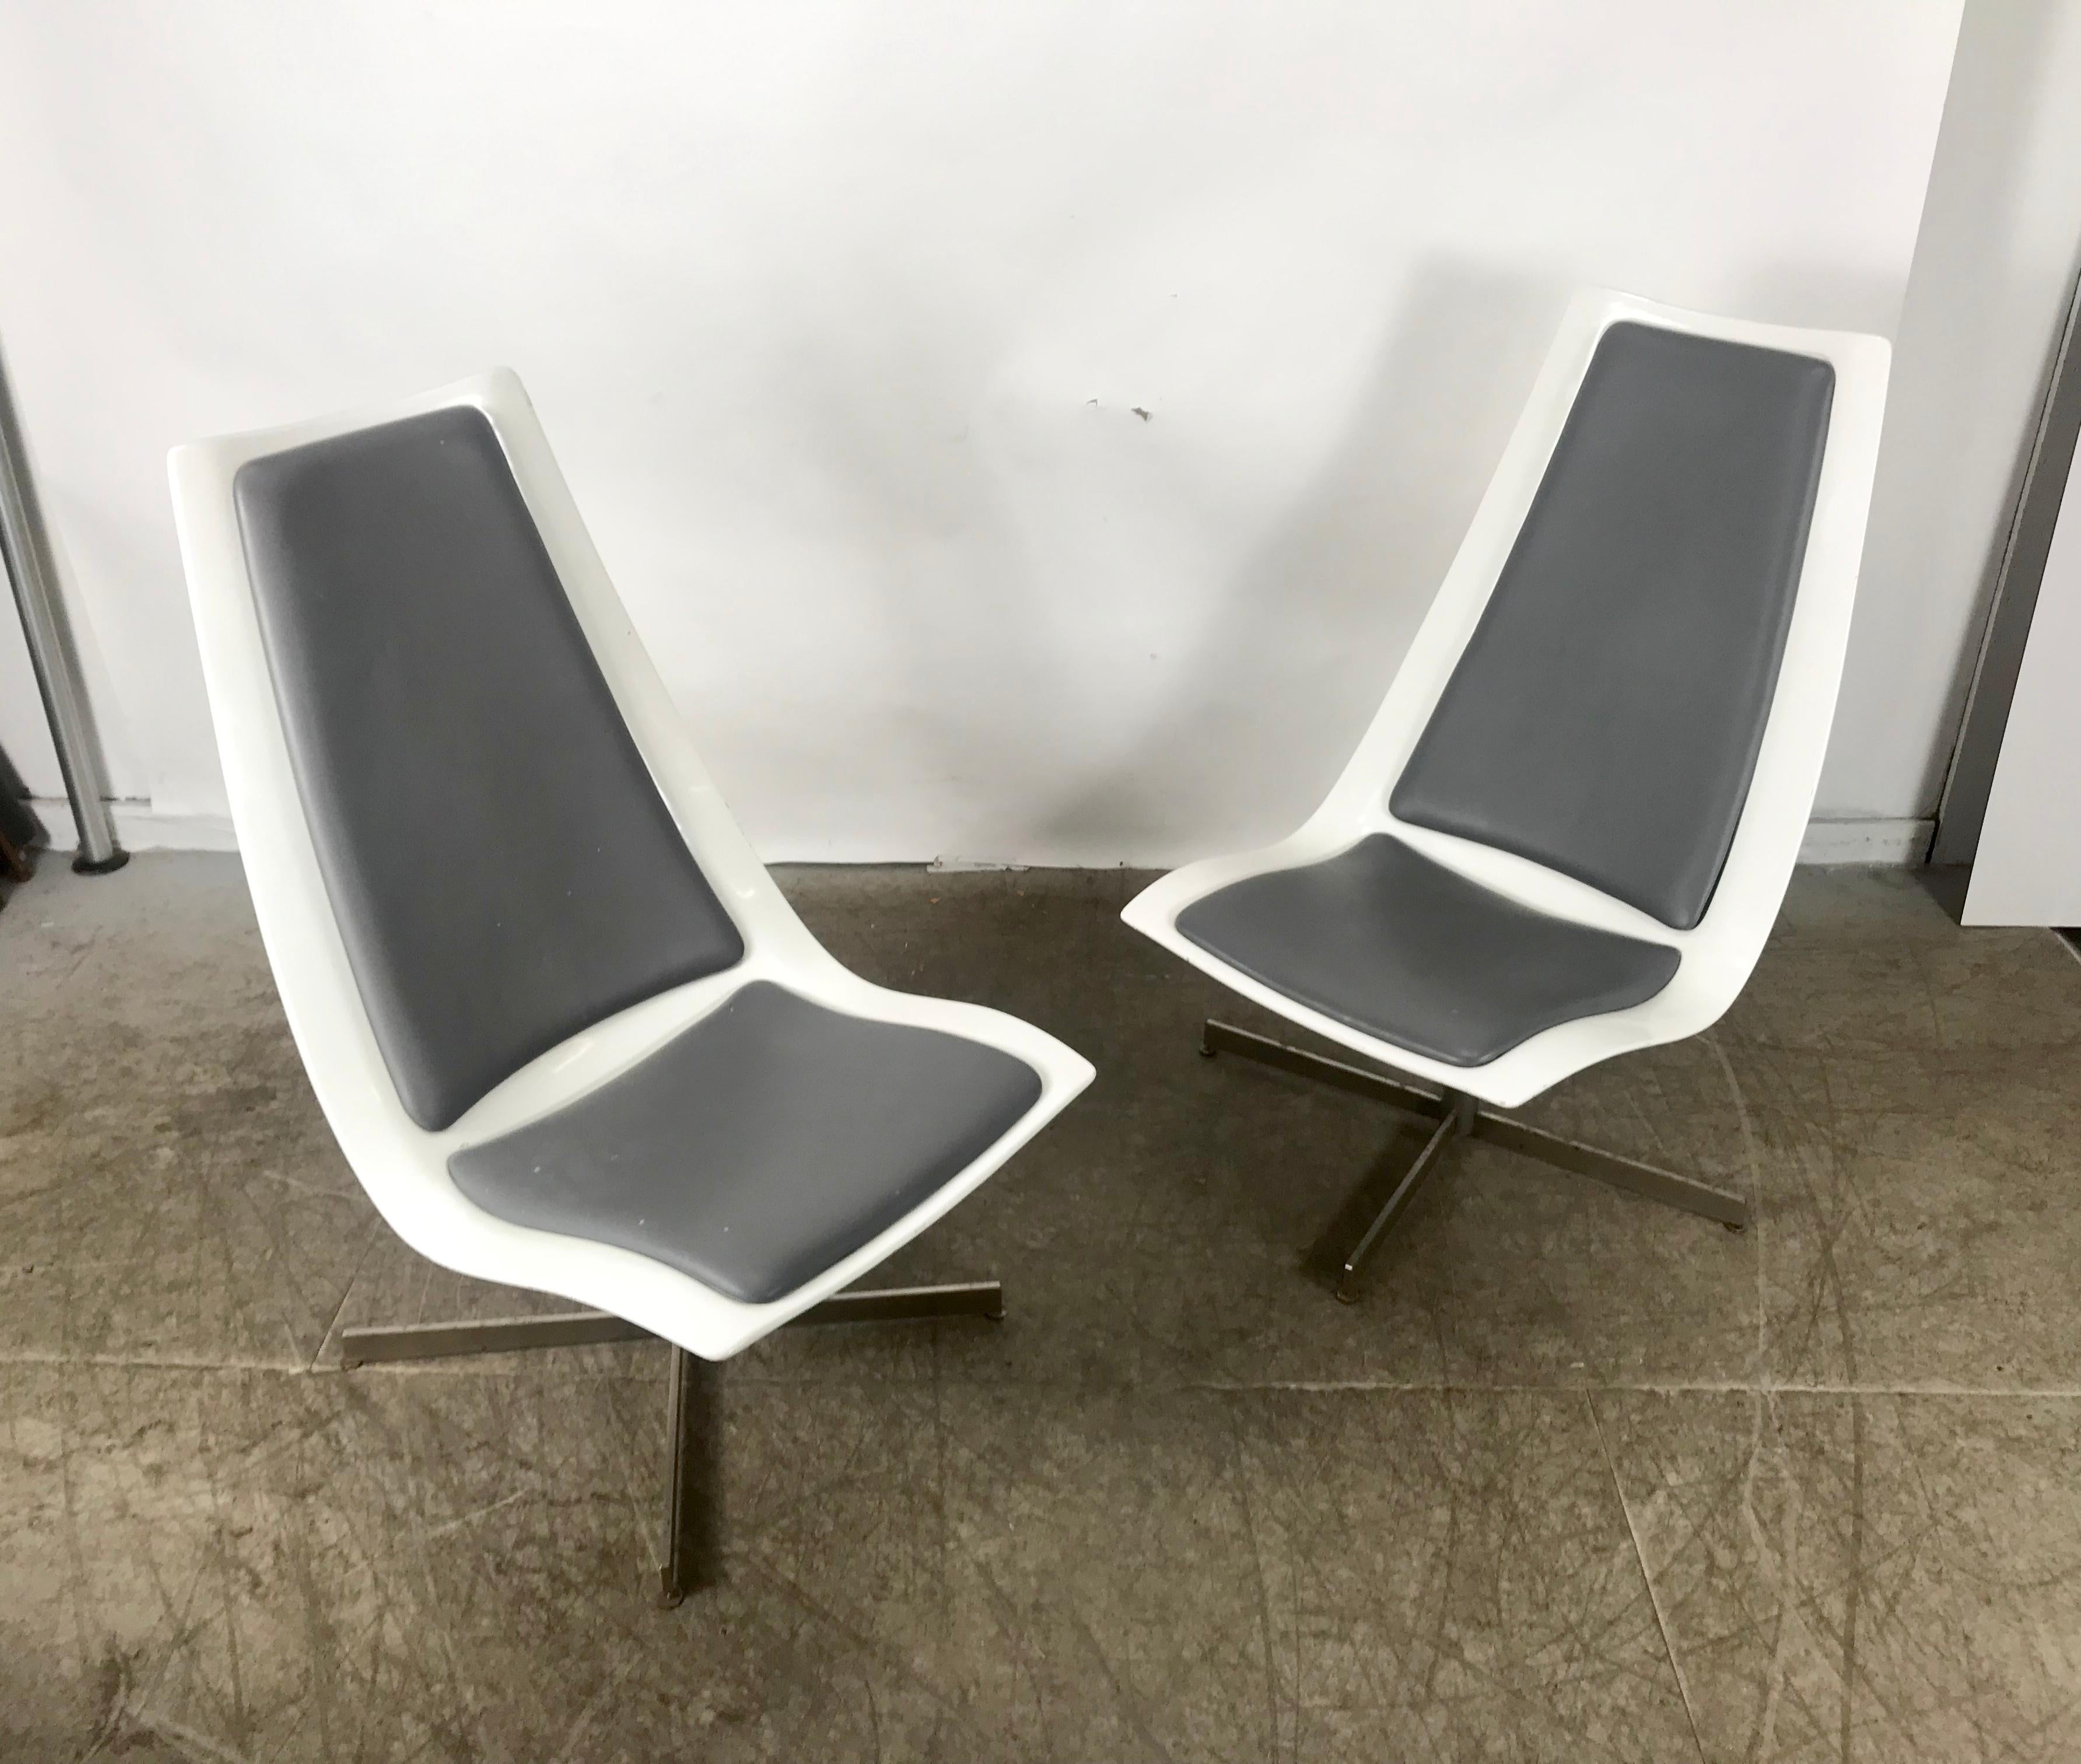 expo 67 chairs